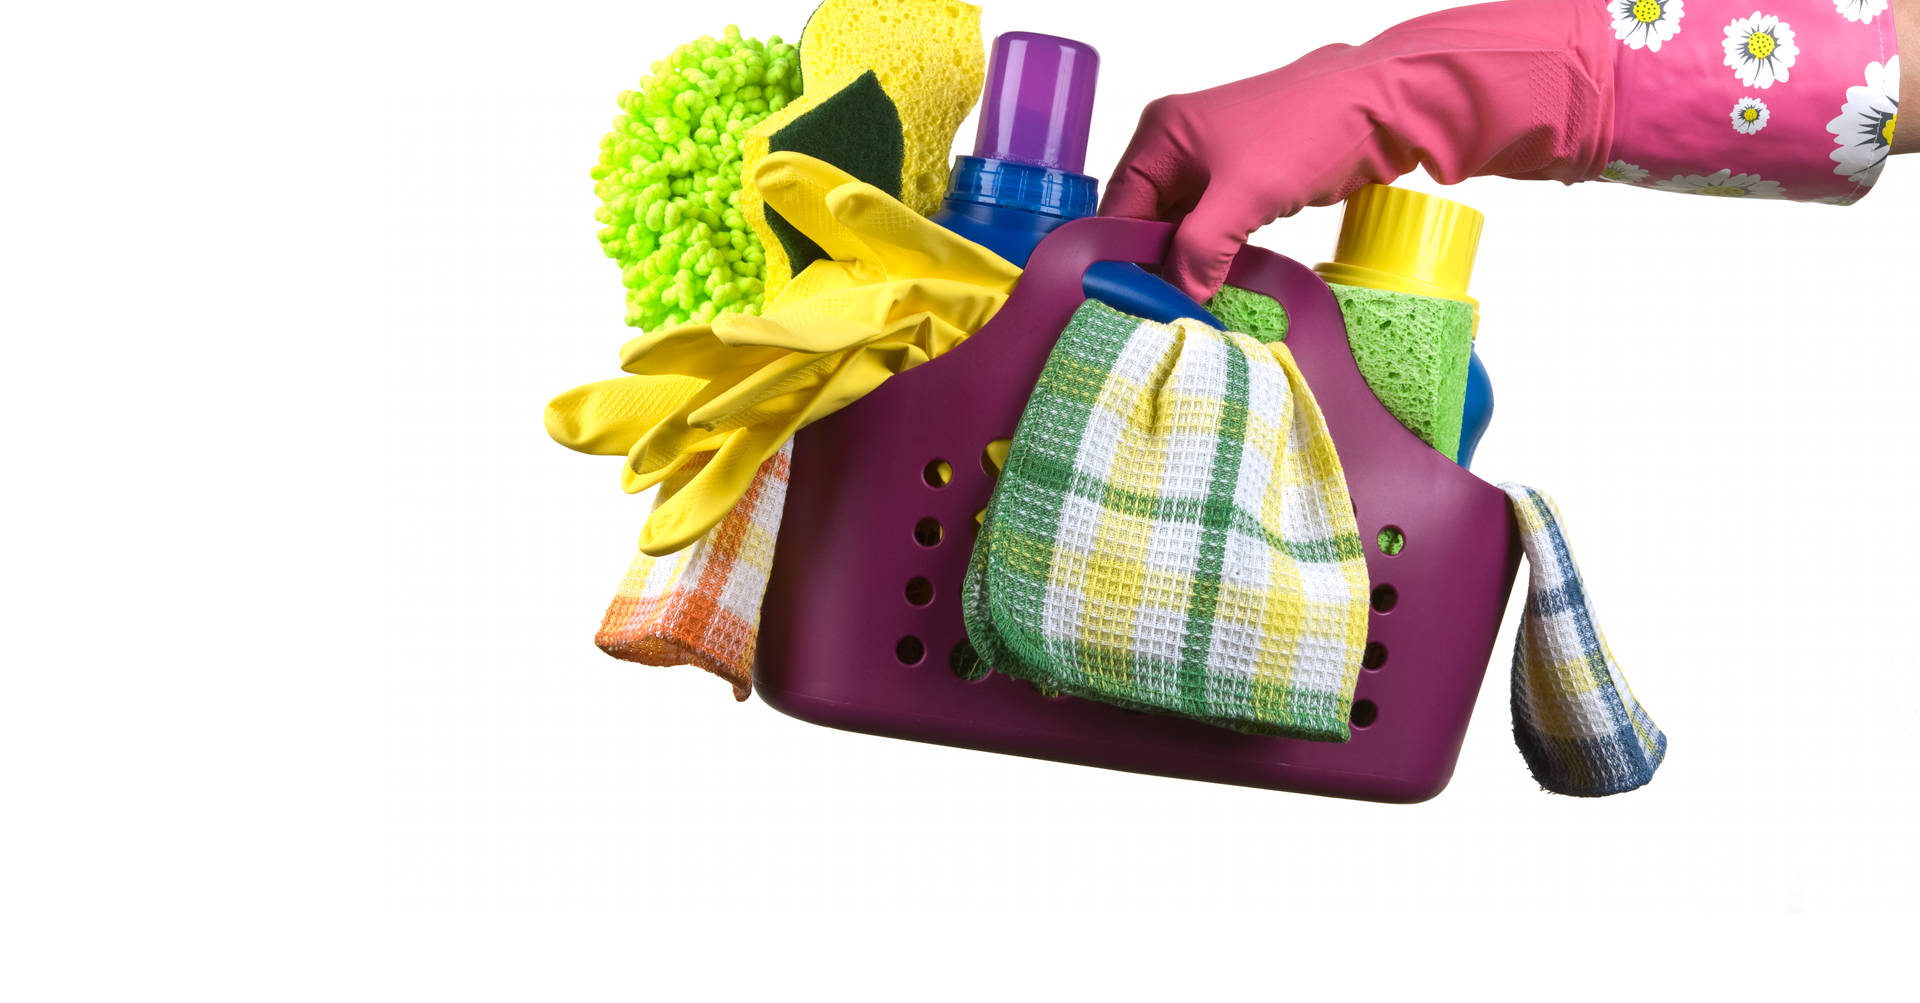 gloved hand holding cleaning supplies